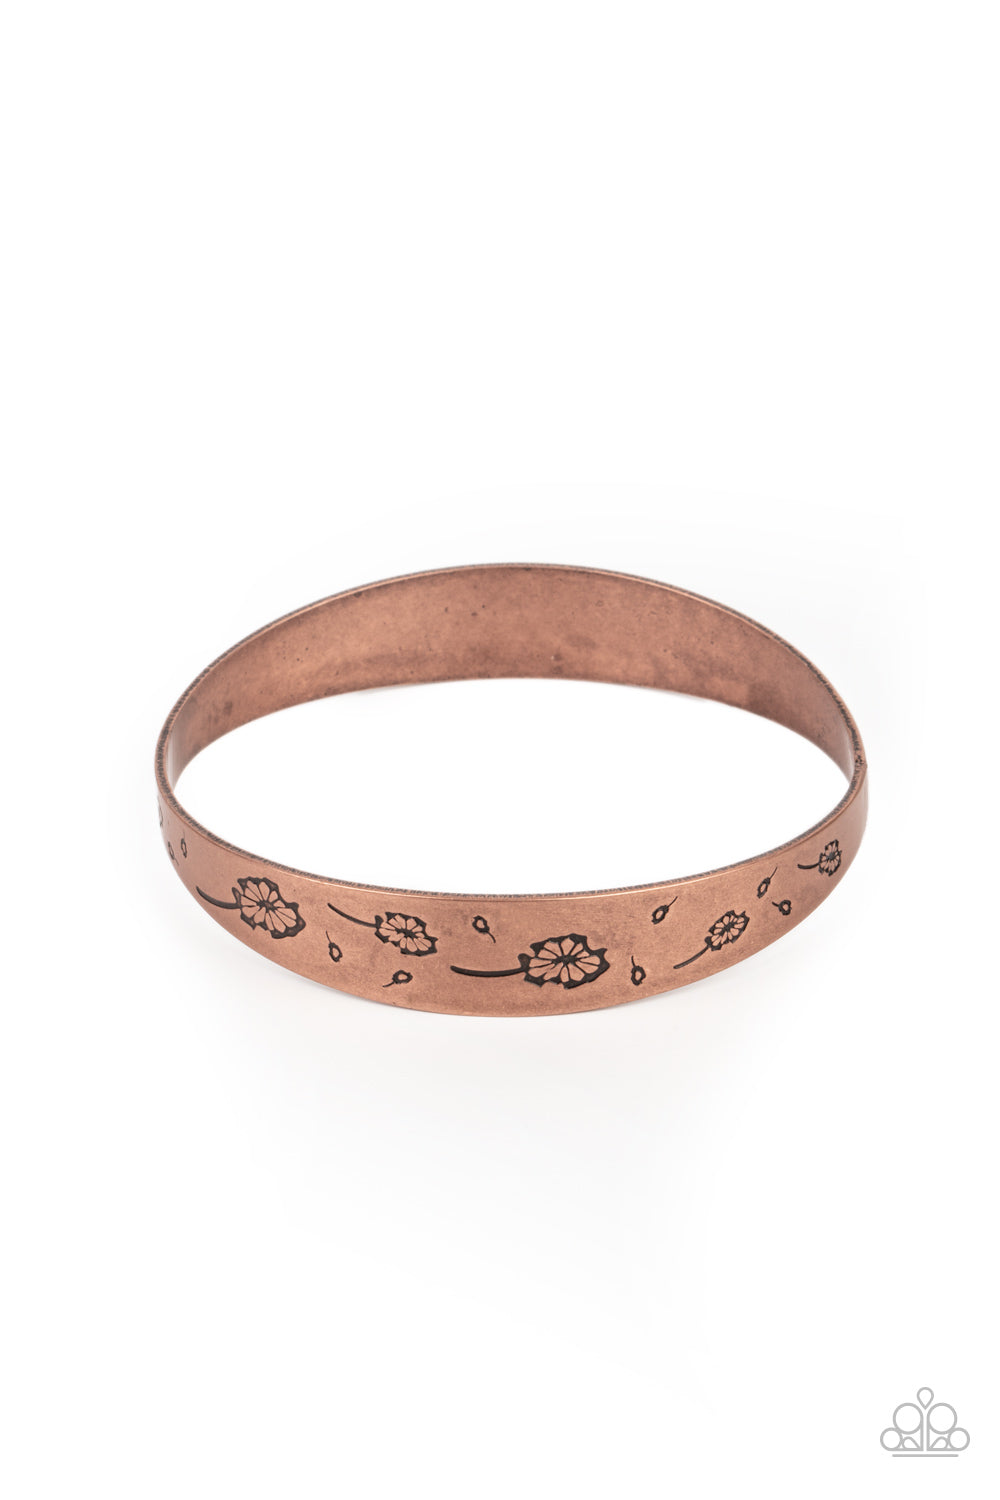 Dandelion Dreamland Copper Bangle Bracelet - Paparazzi Accessories  Flowery dandelion-like patterns are stamped across the front of an uneven copper bangle, creating a stackable seasonal display around the wrist.  ﻿All Paparazzi Accessories are lead free and nickel free!  Sold as one individual bracelet.